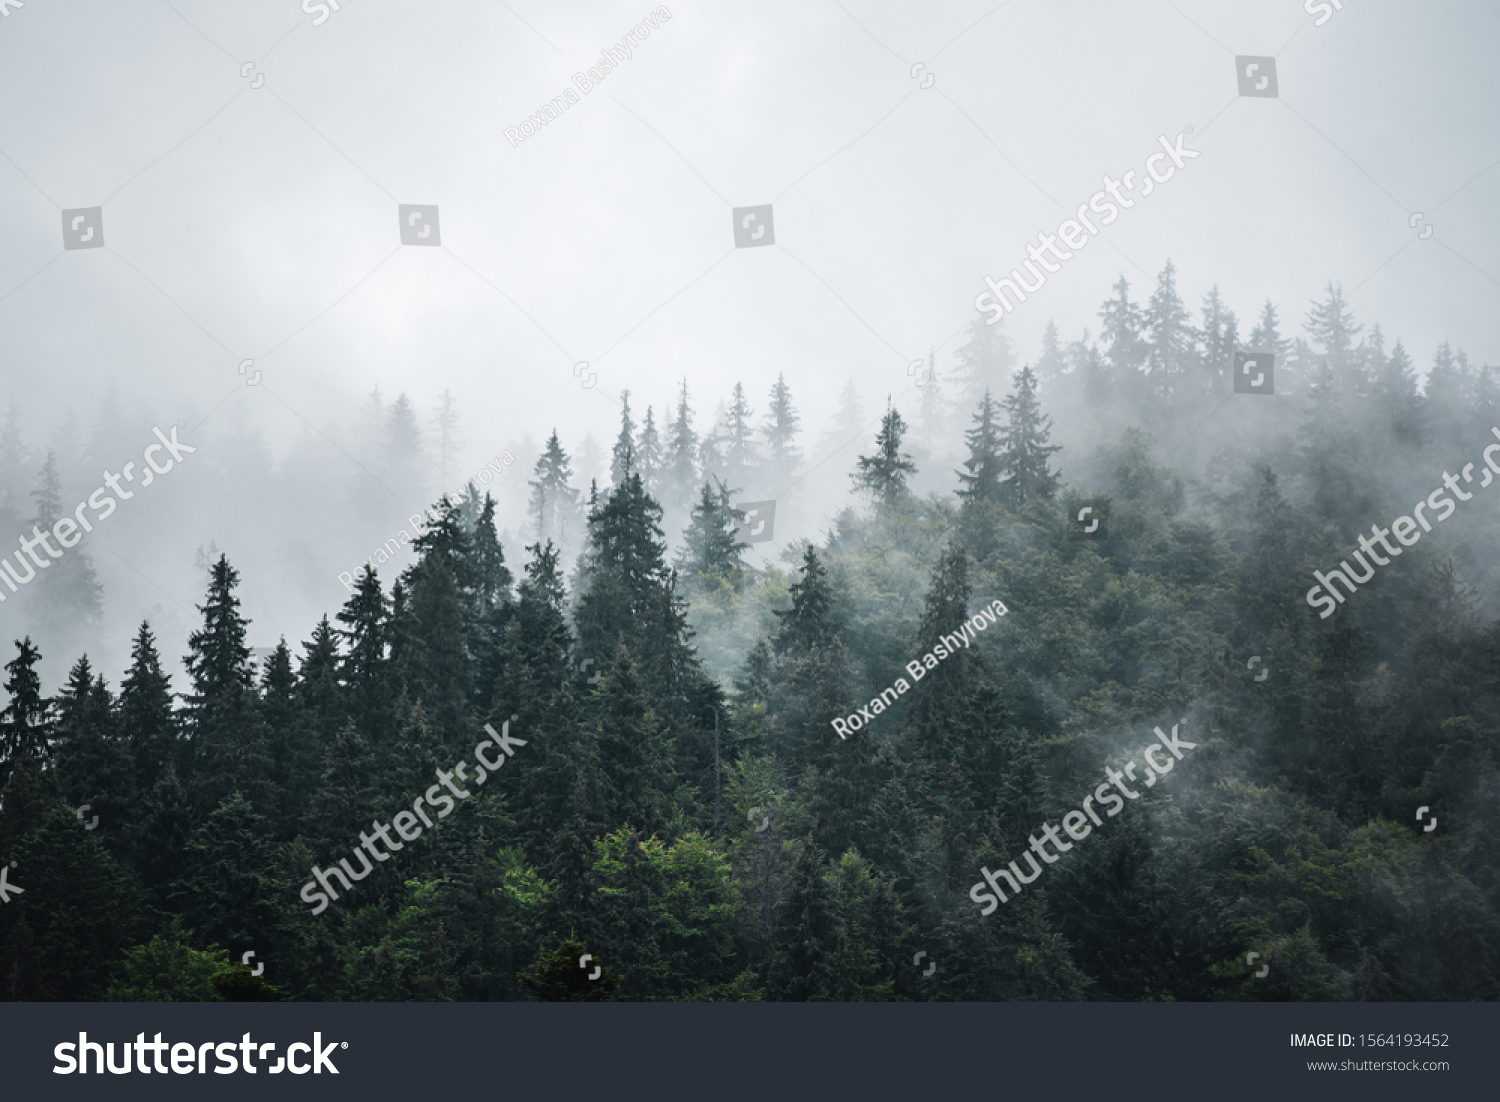 Misty foggy mountain landscape with fir forest and copyspace in vintage retro hipster style #1564193452